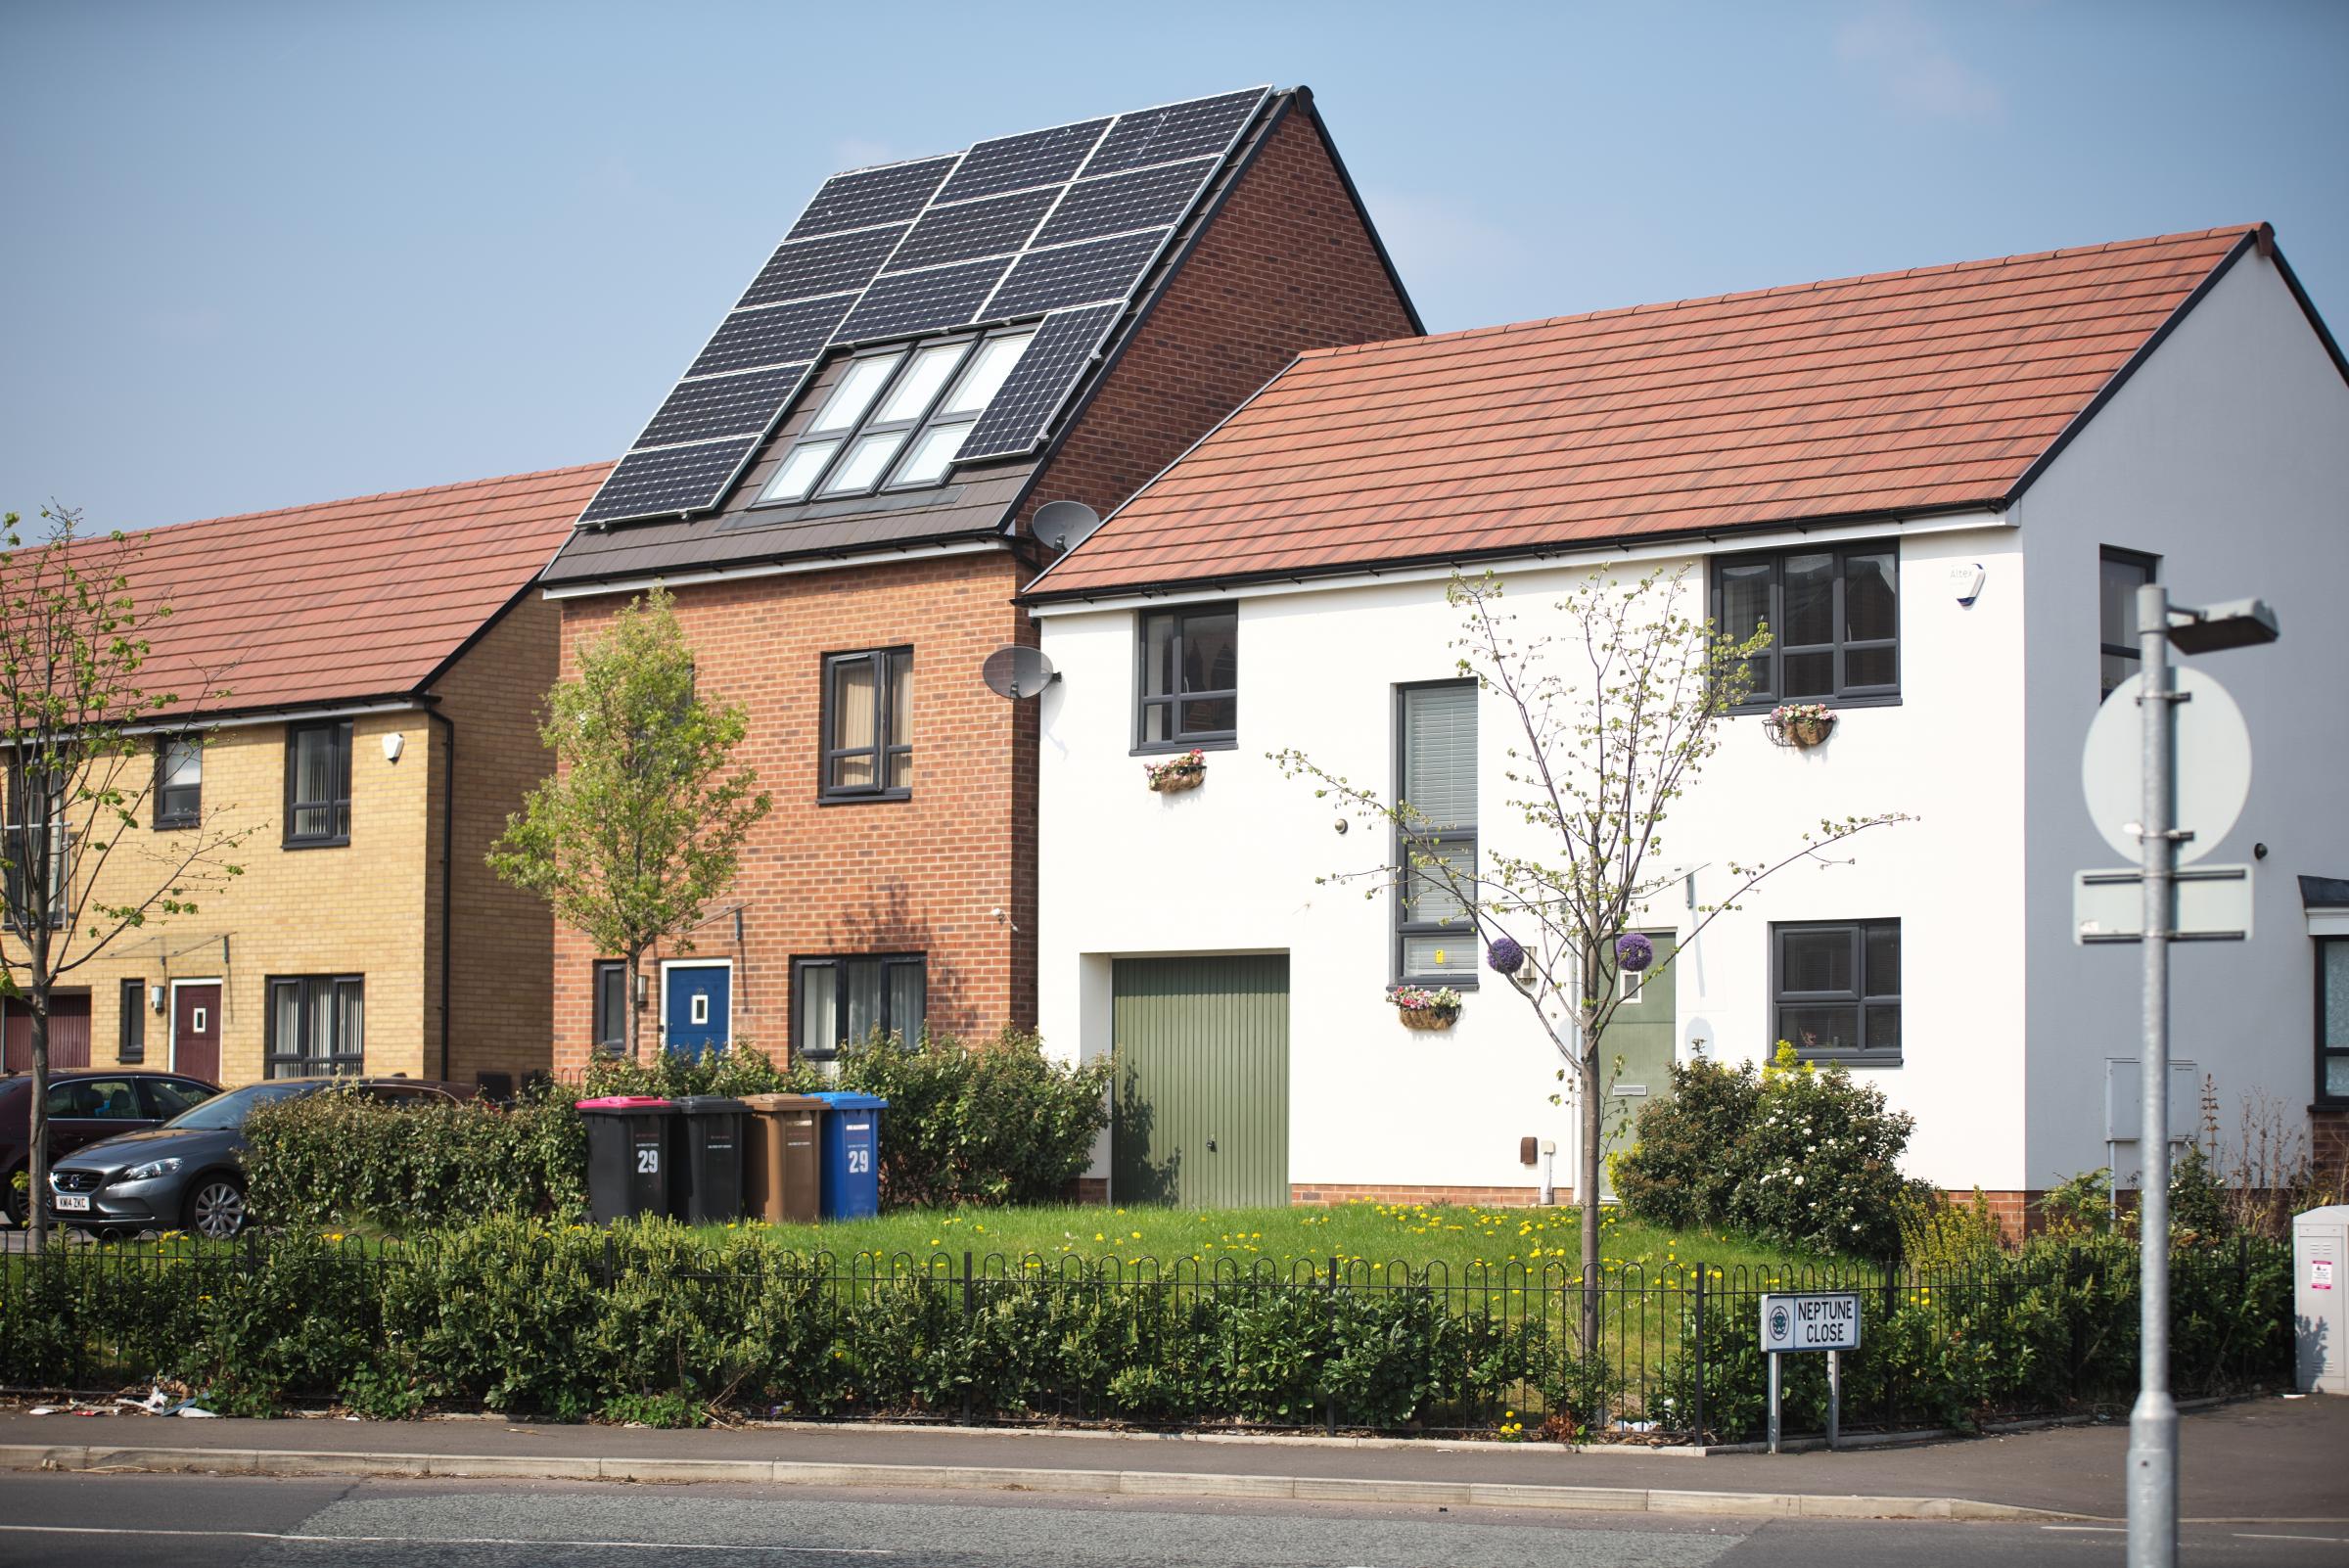 A solar panel installation in Salford (Picture: GMCA)